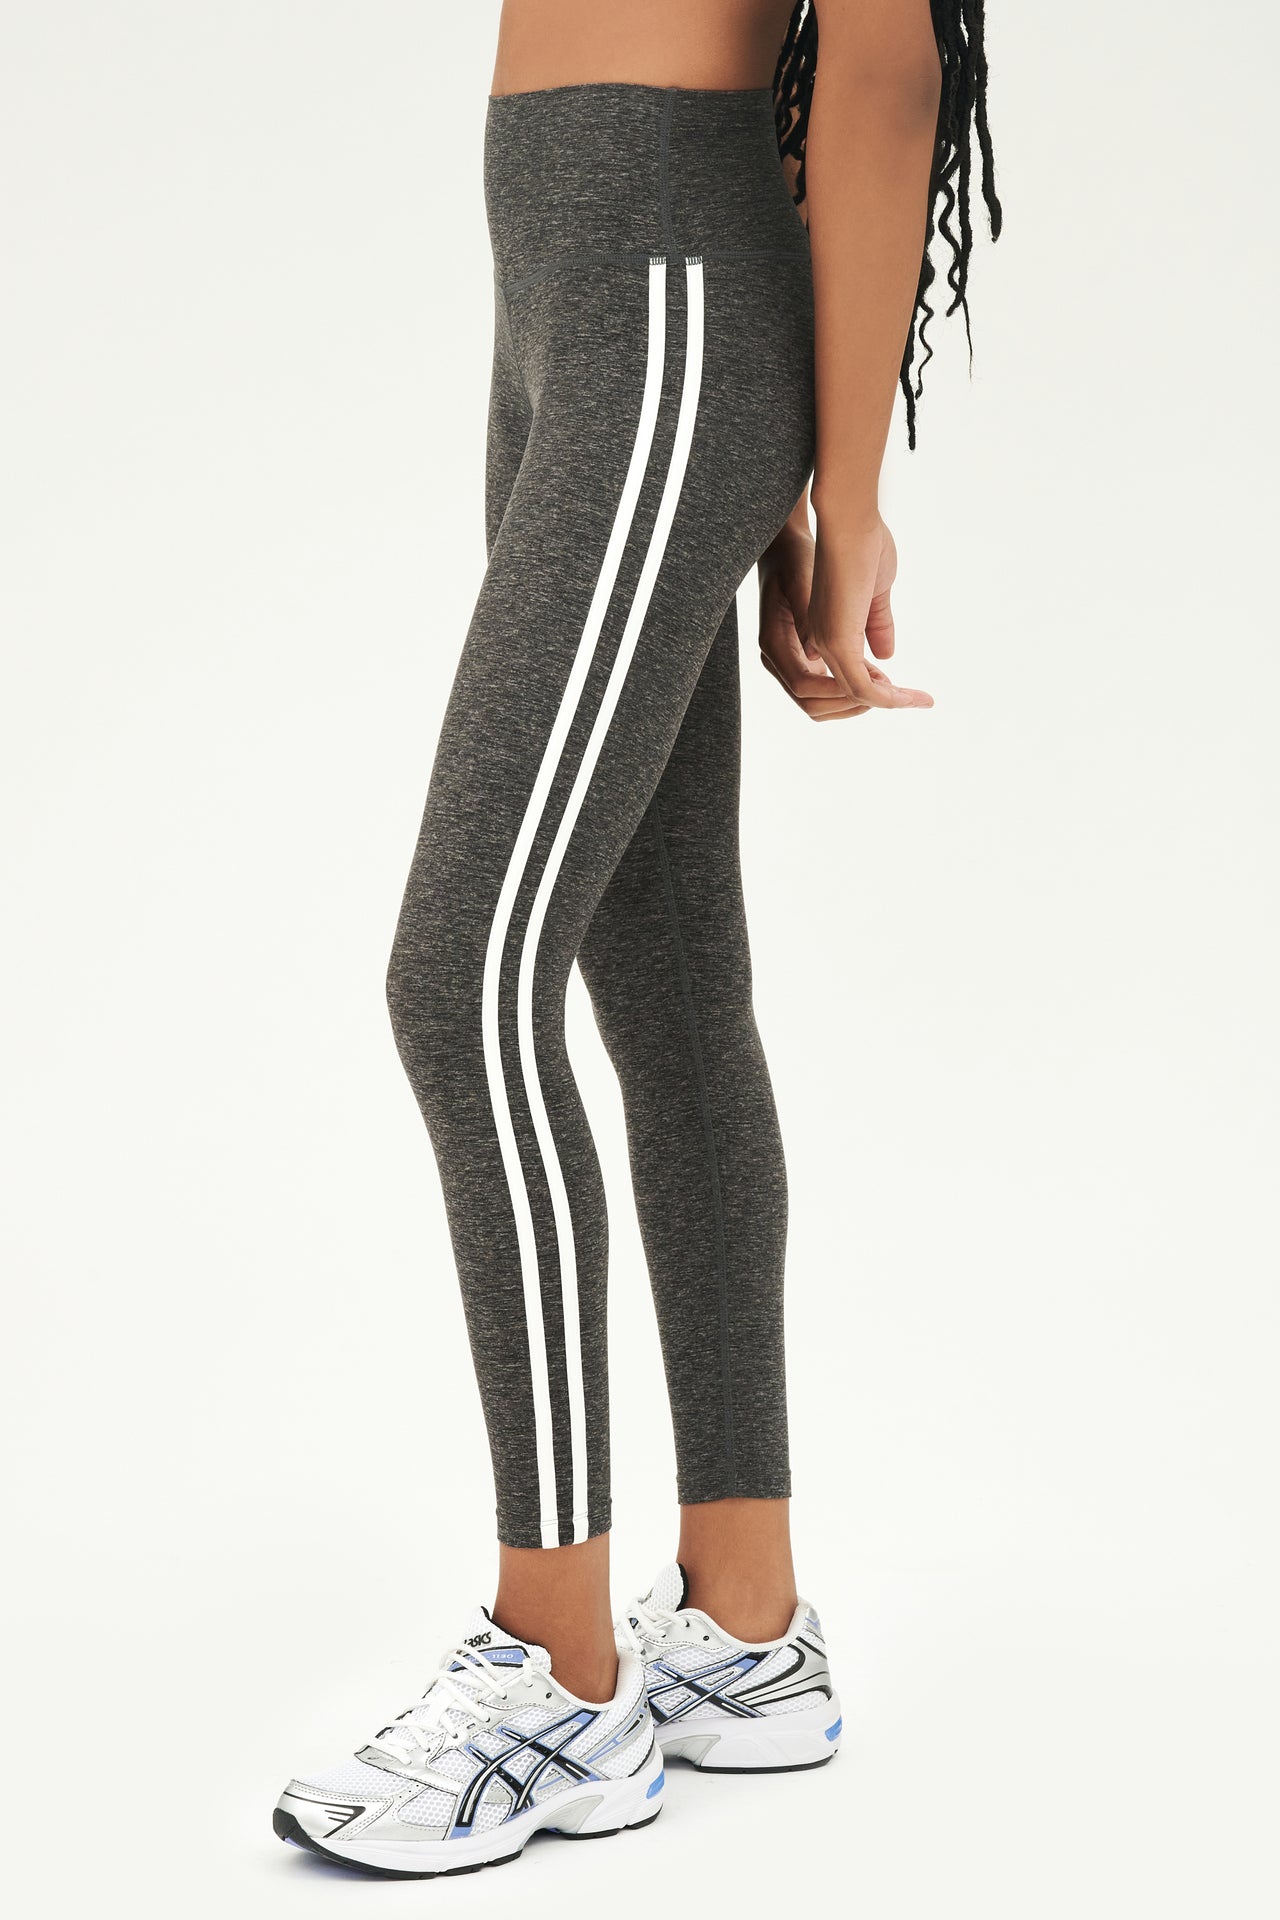 Side view of girl wearing dark grey leggings with thin white and black stripes down the side with white shoes